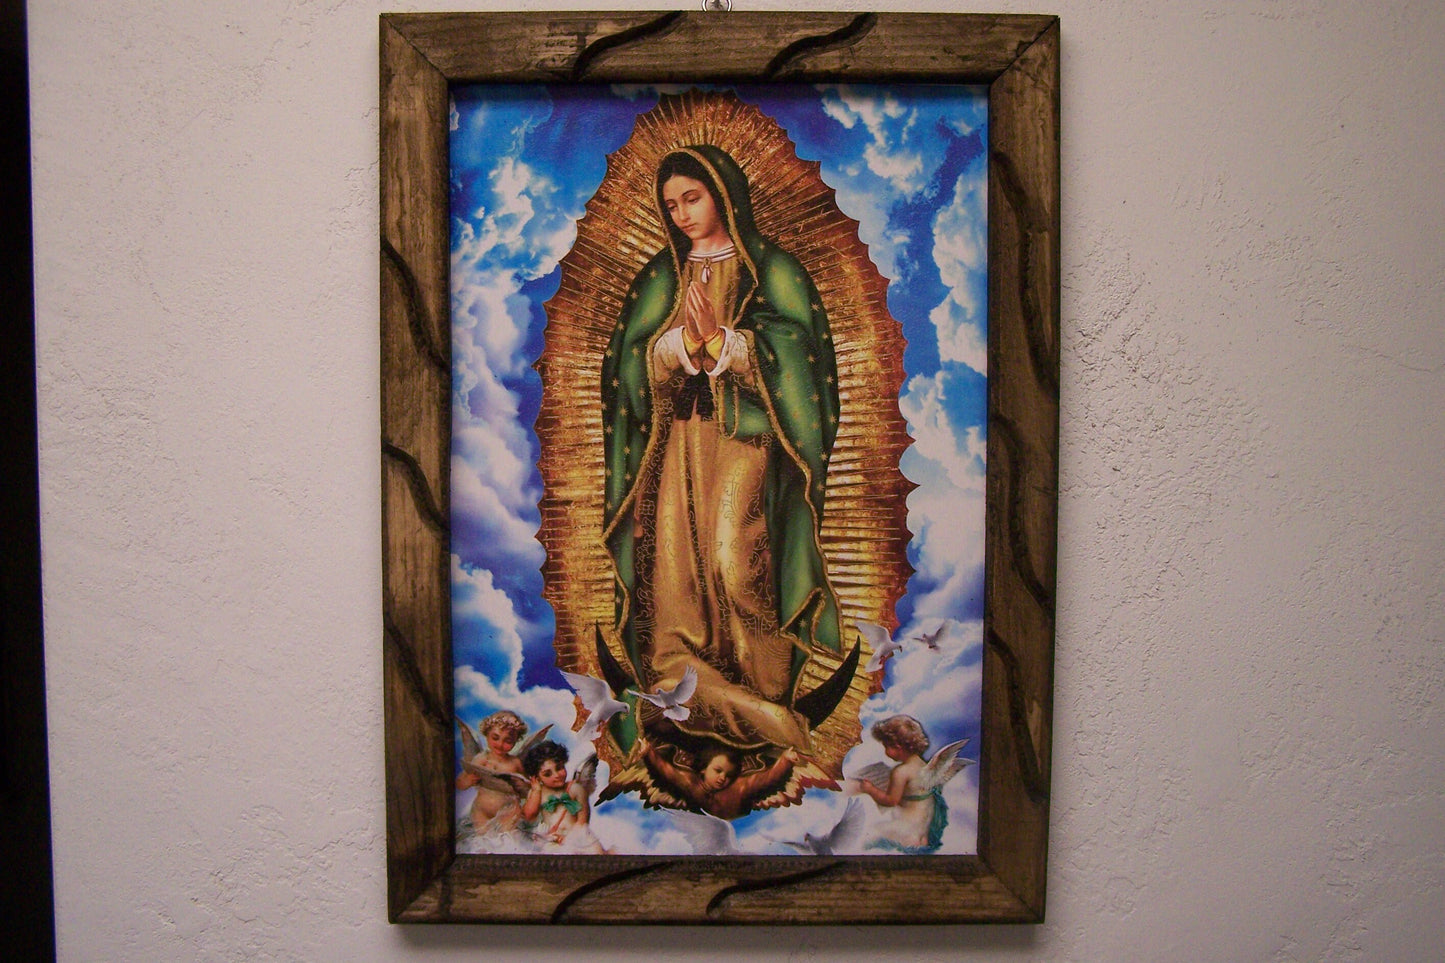 Framed Giclee Print - Virgin of Guadalupe in Blue Sky with Cherubs - Mexico